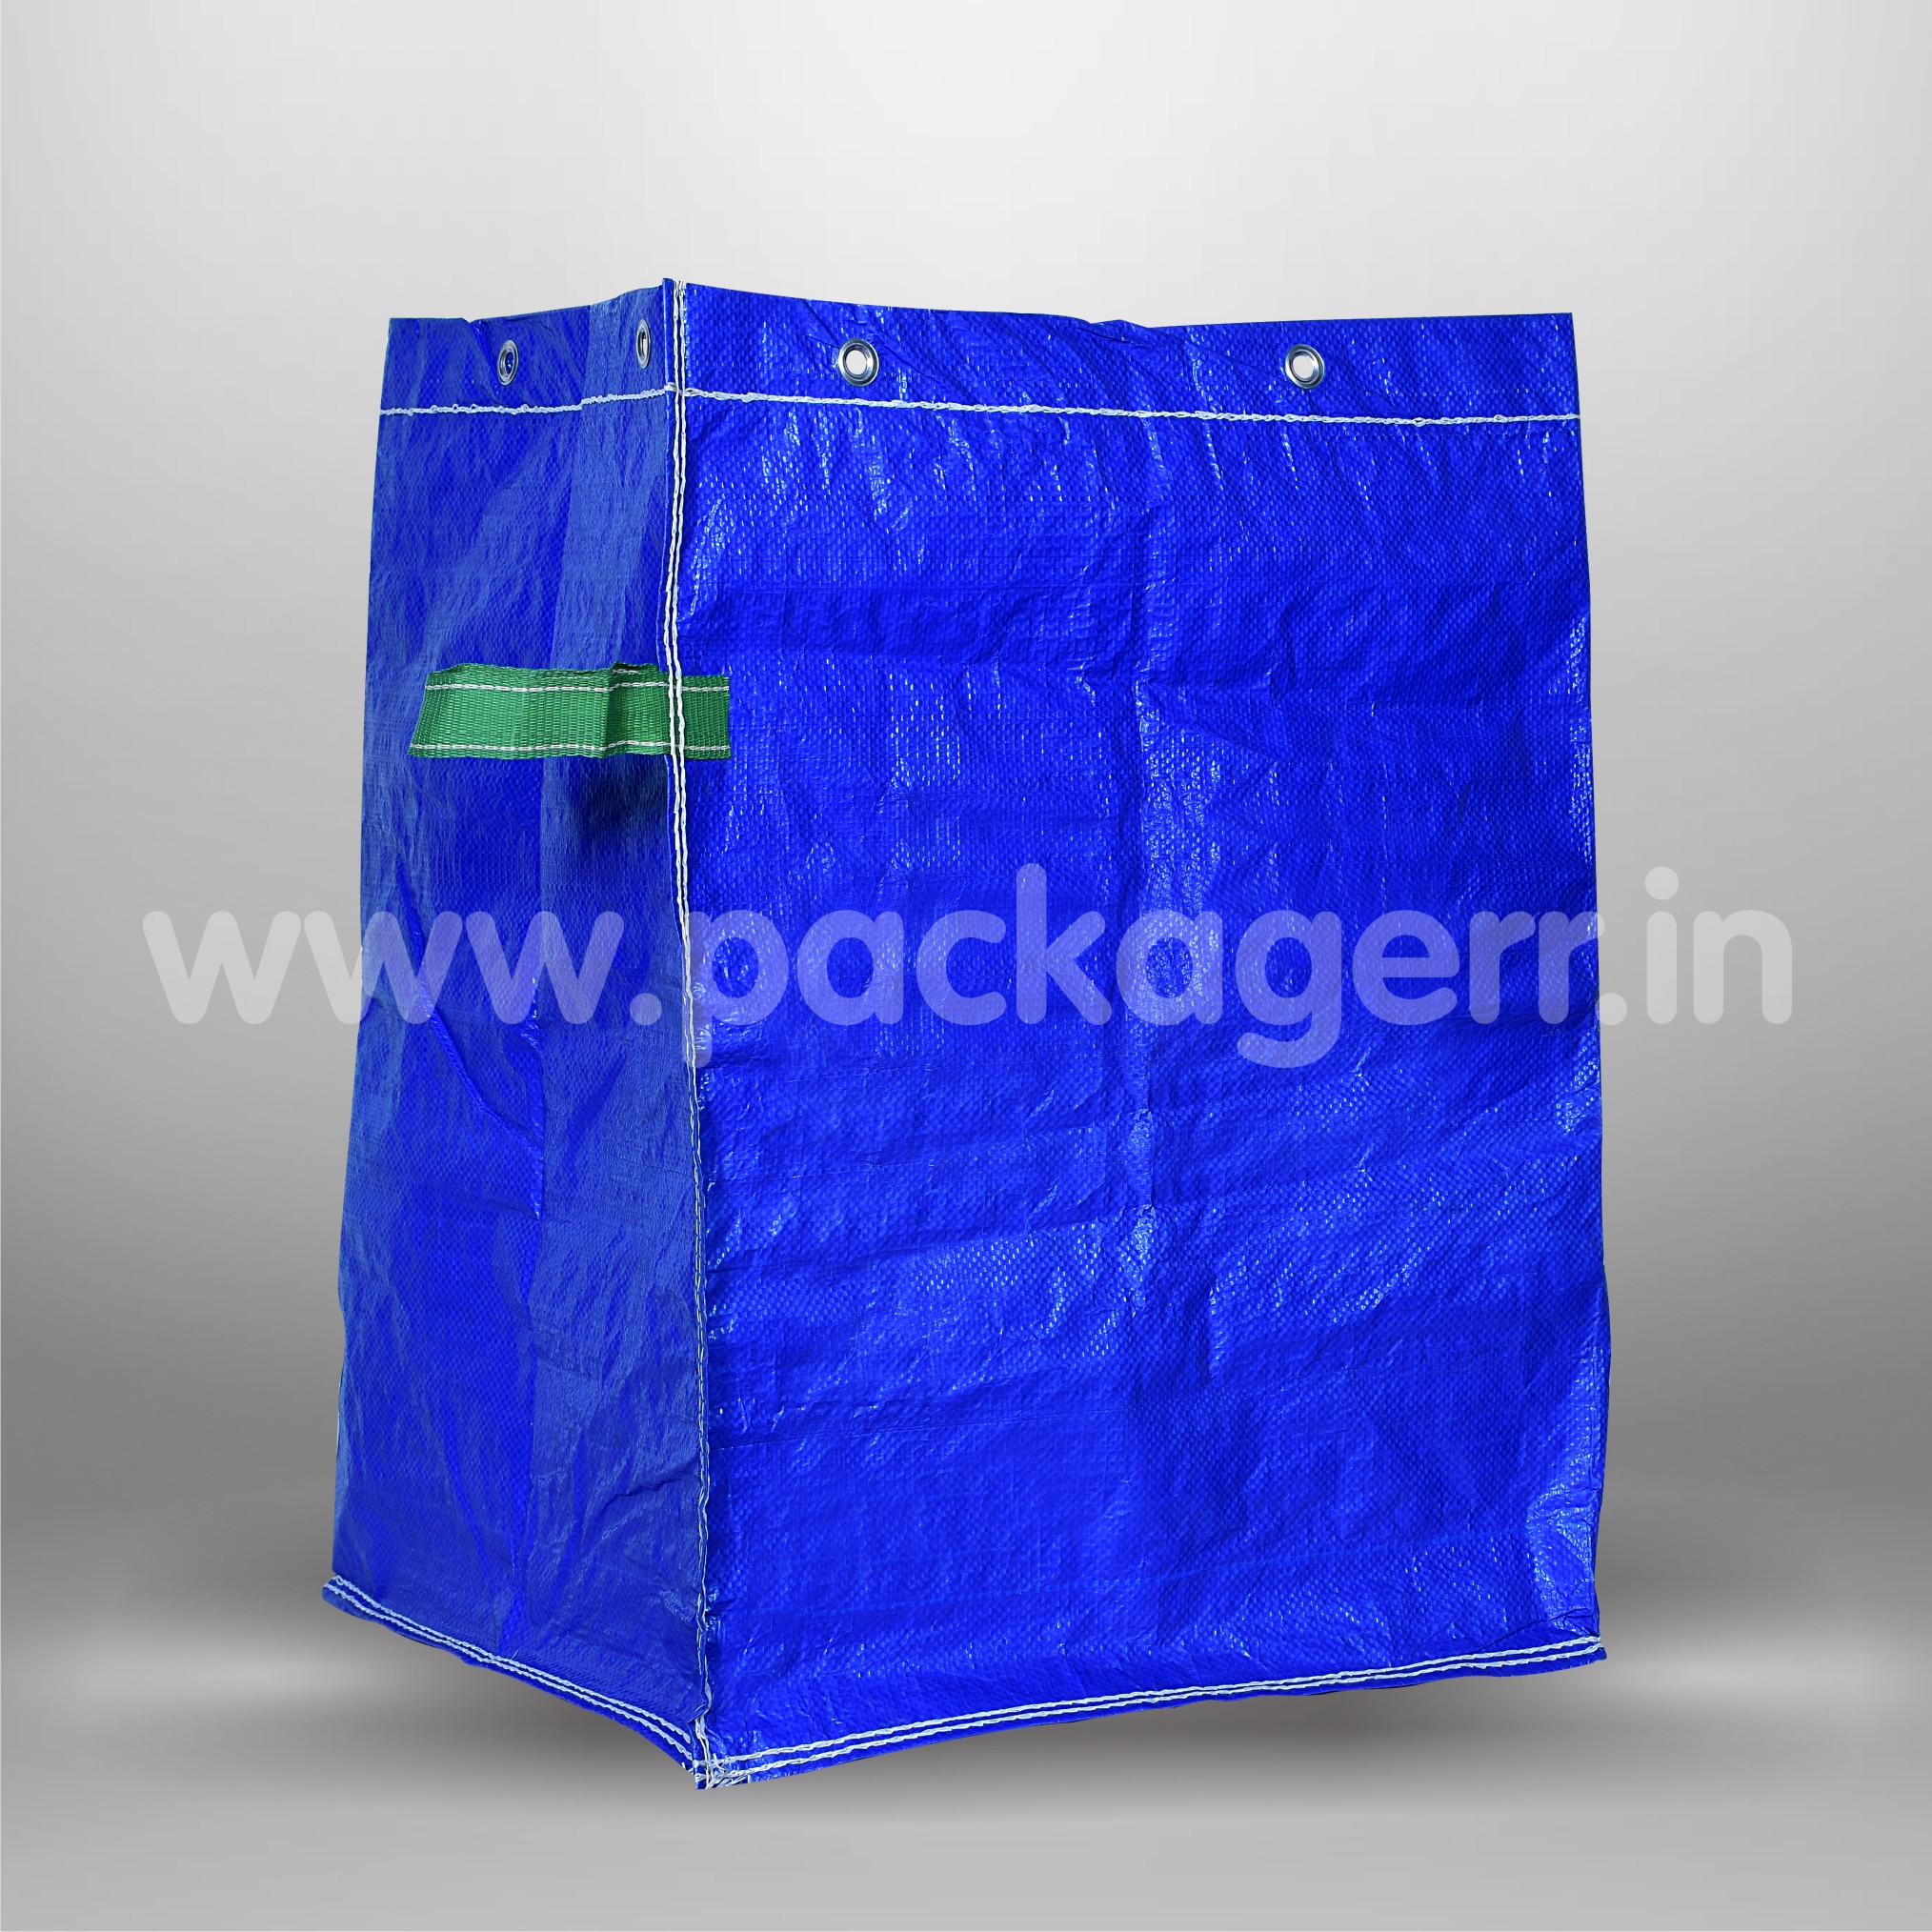 Custom E-commerce Packaging Boxes and Bags | ForestPackage